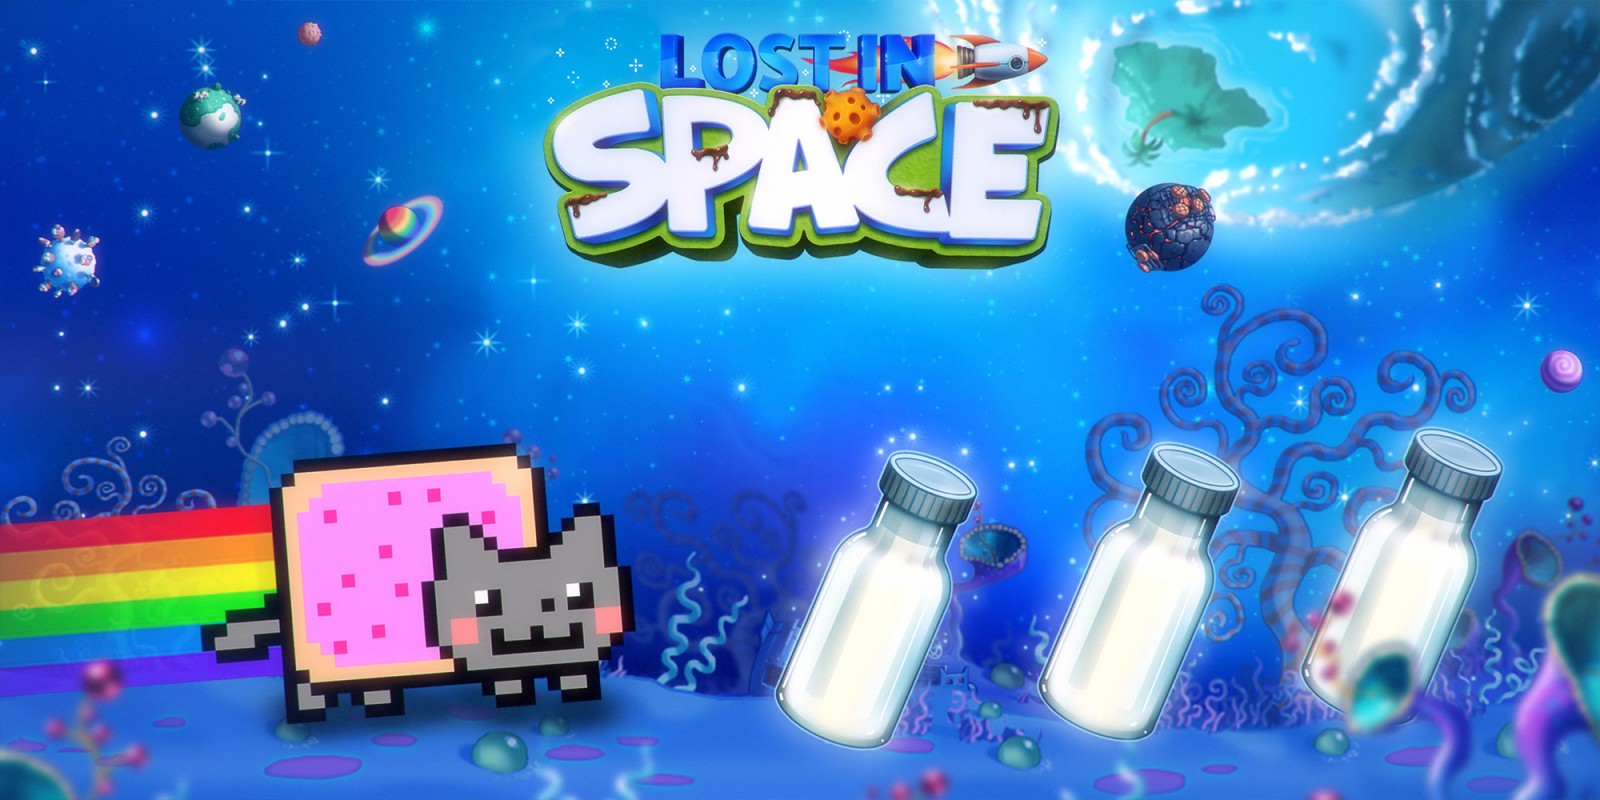 play nyan cat lost in space